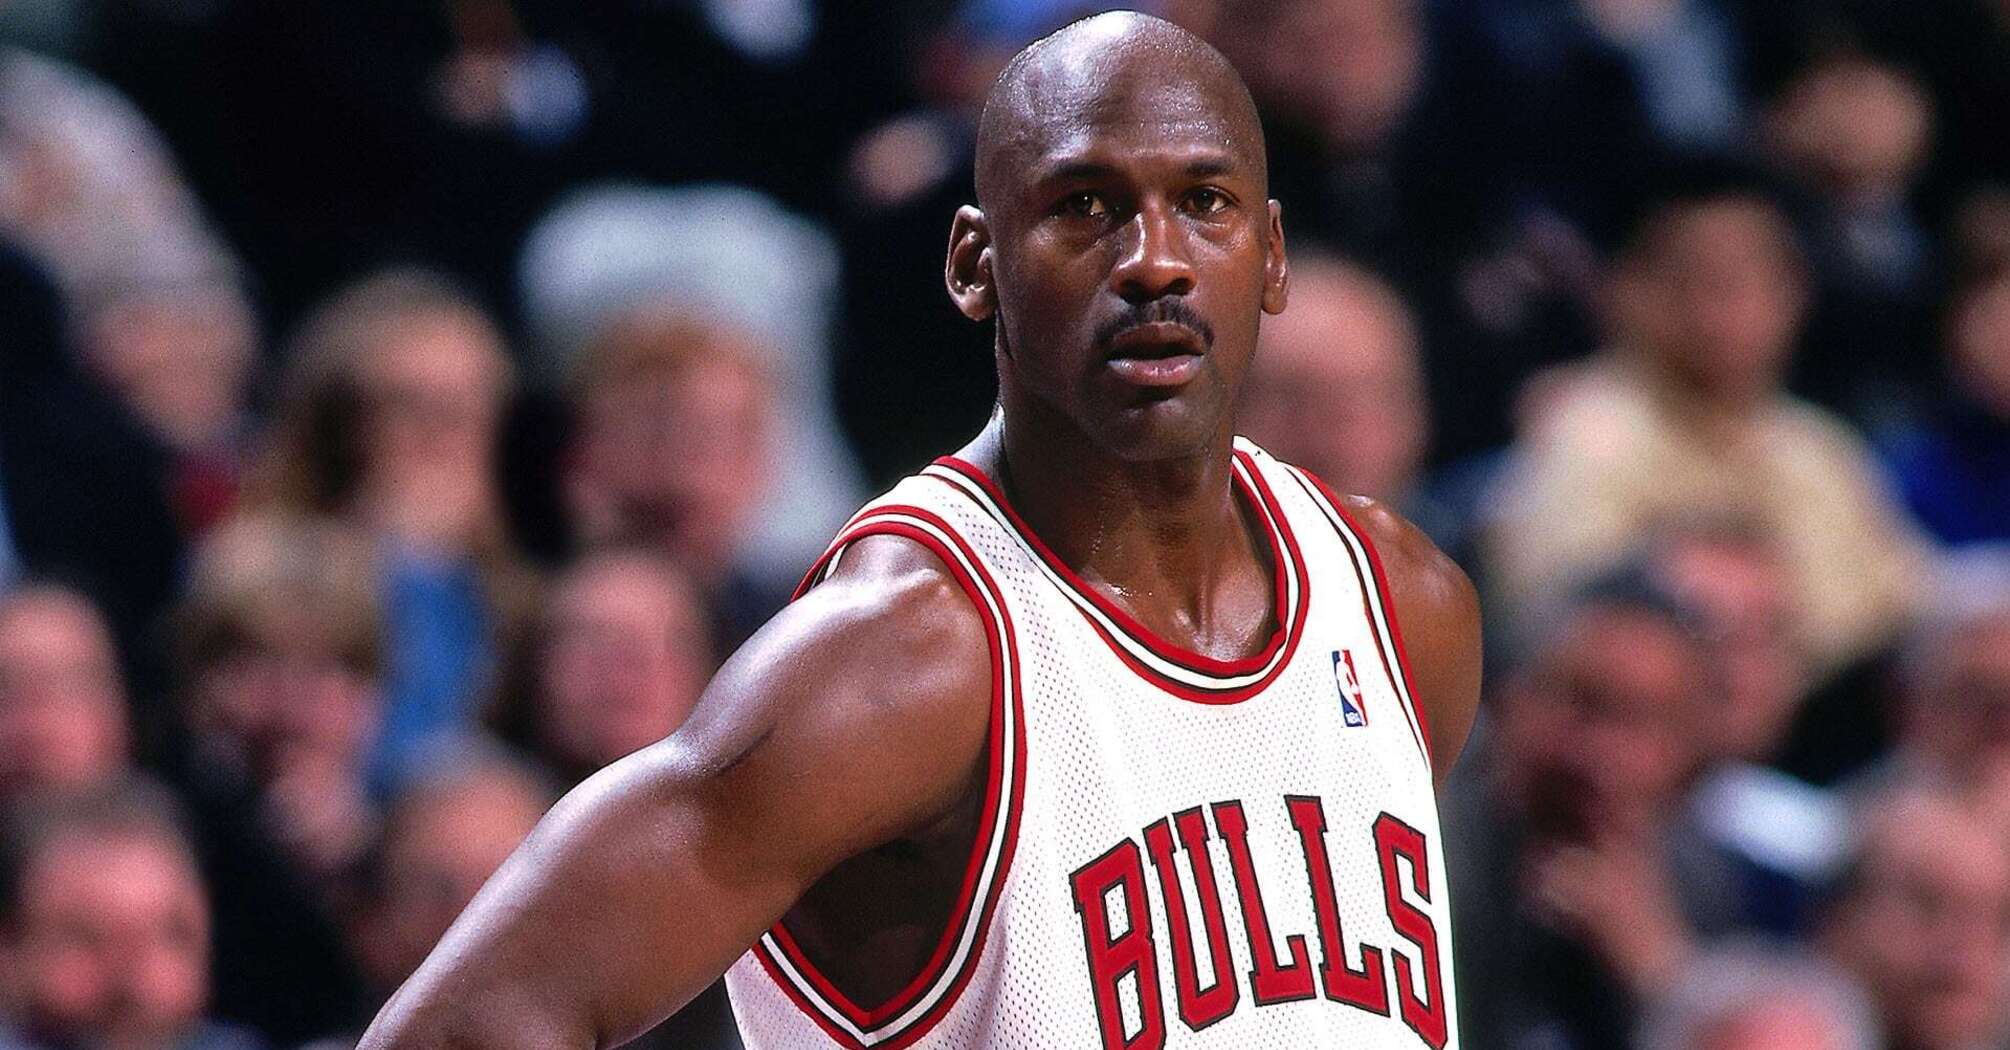 Michael Jordan had a surprising superstition he adhered to before every game